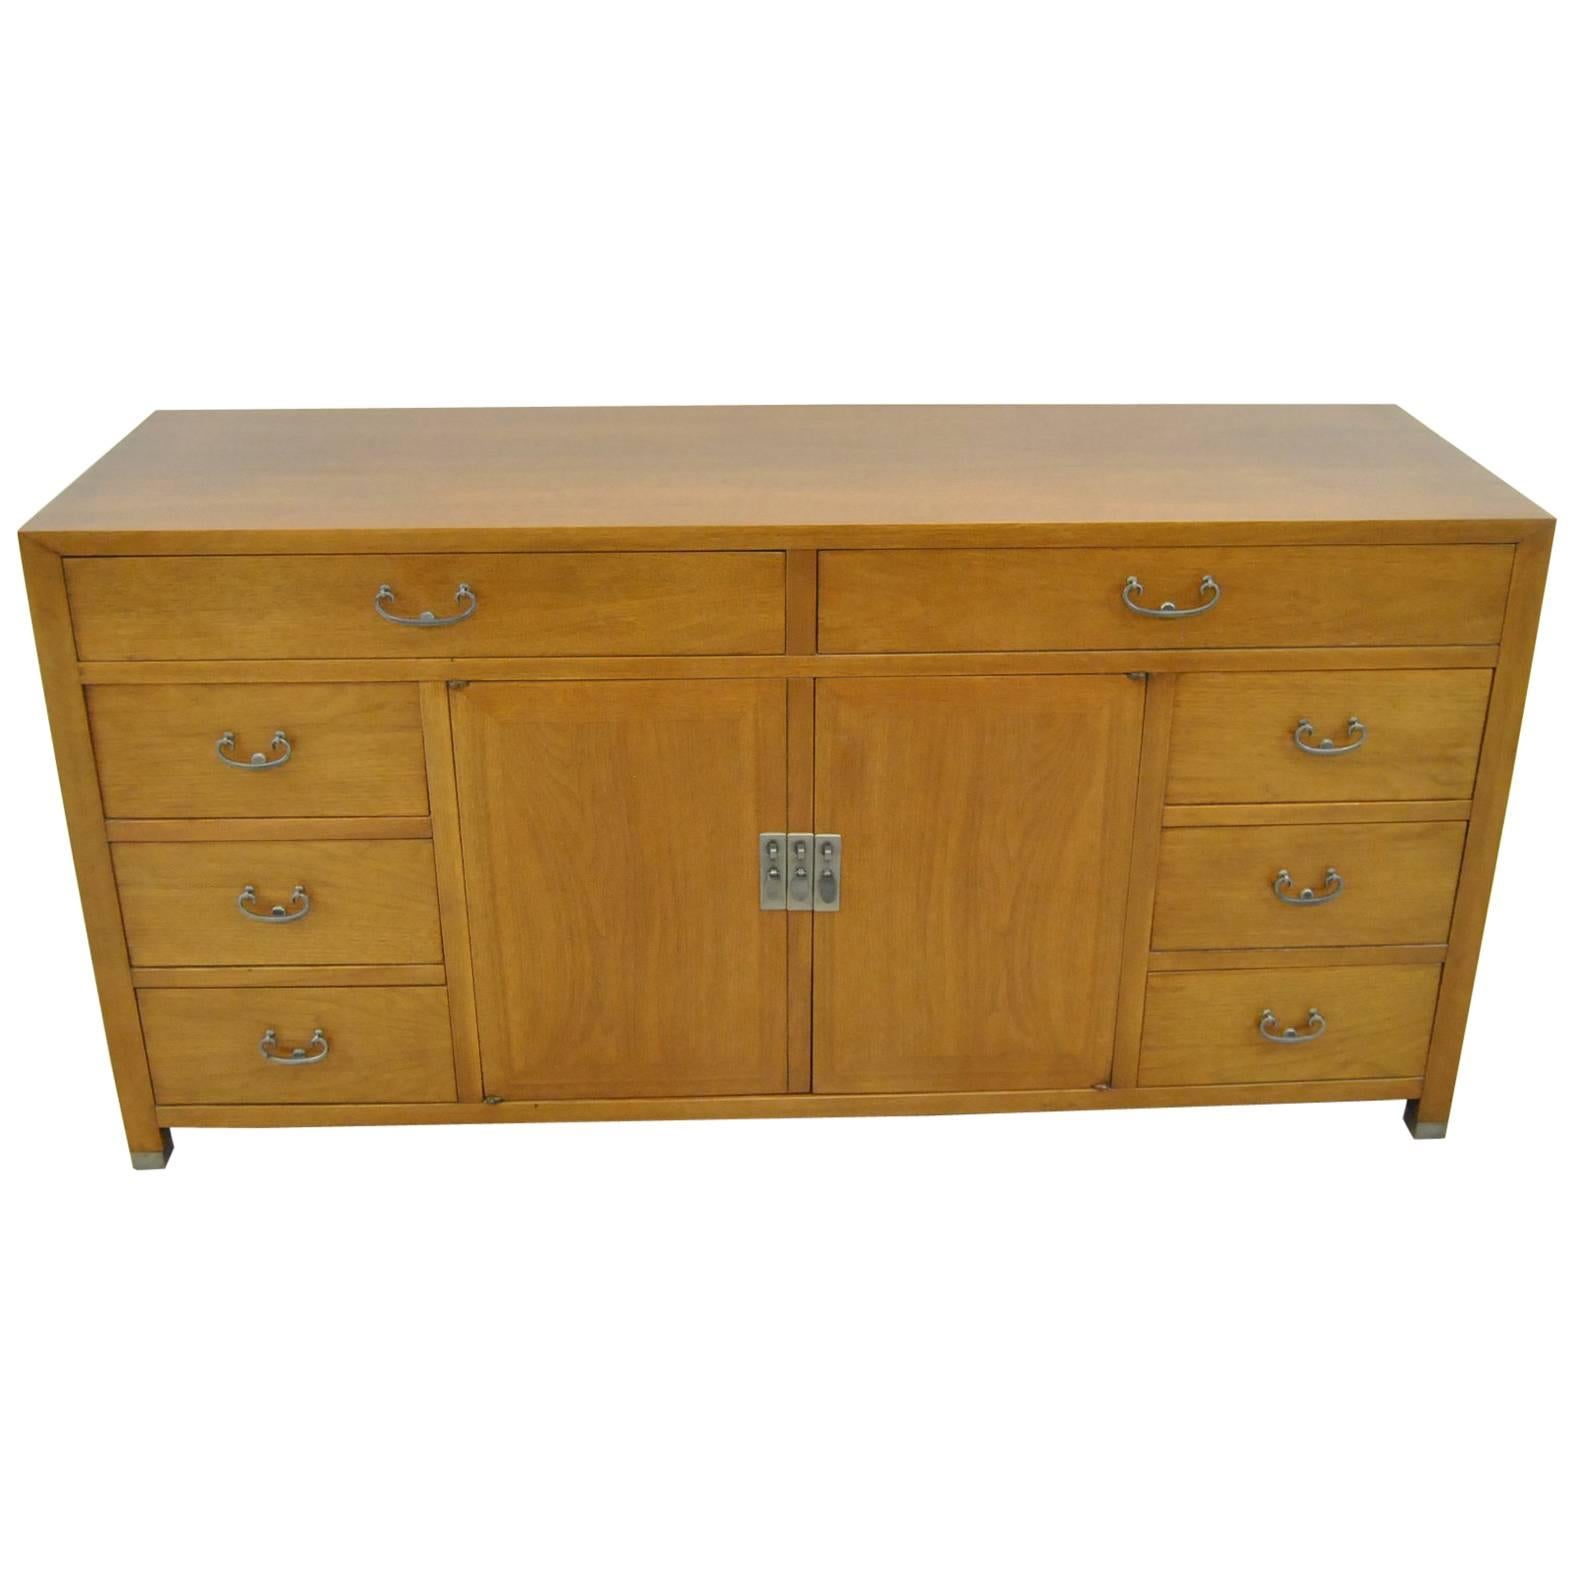 Mid-Century Walnut Asian Influence Credenza by American of Martinsville